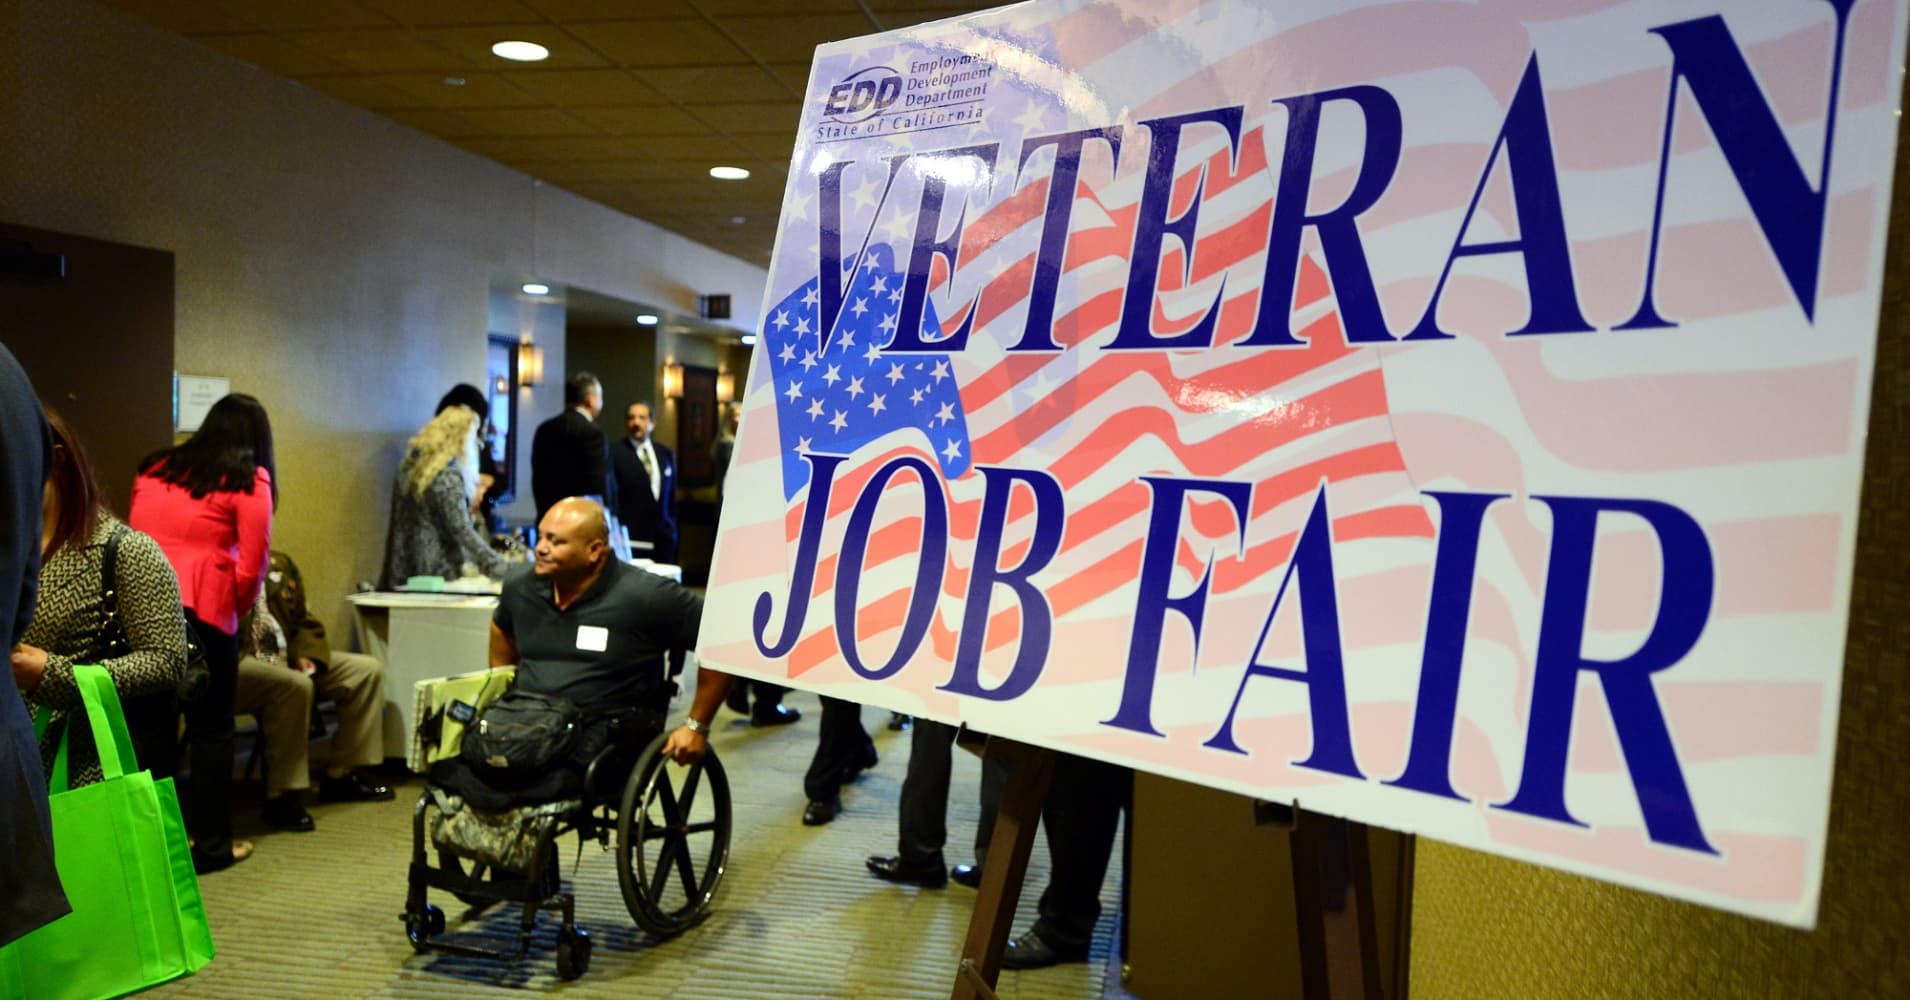 The organization helping veterans get jobs by teaching them how to re-adjust to civilian life